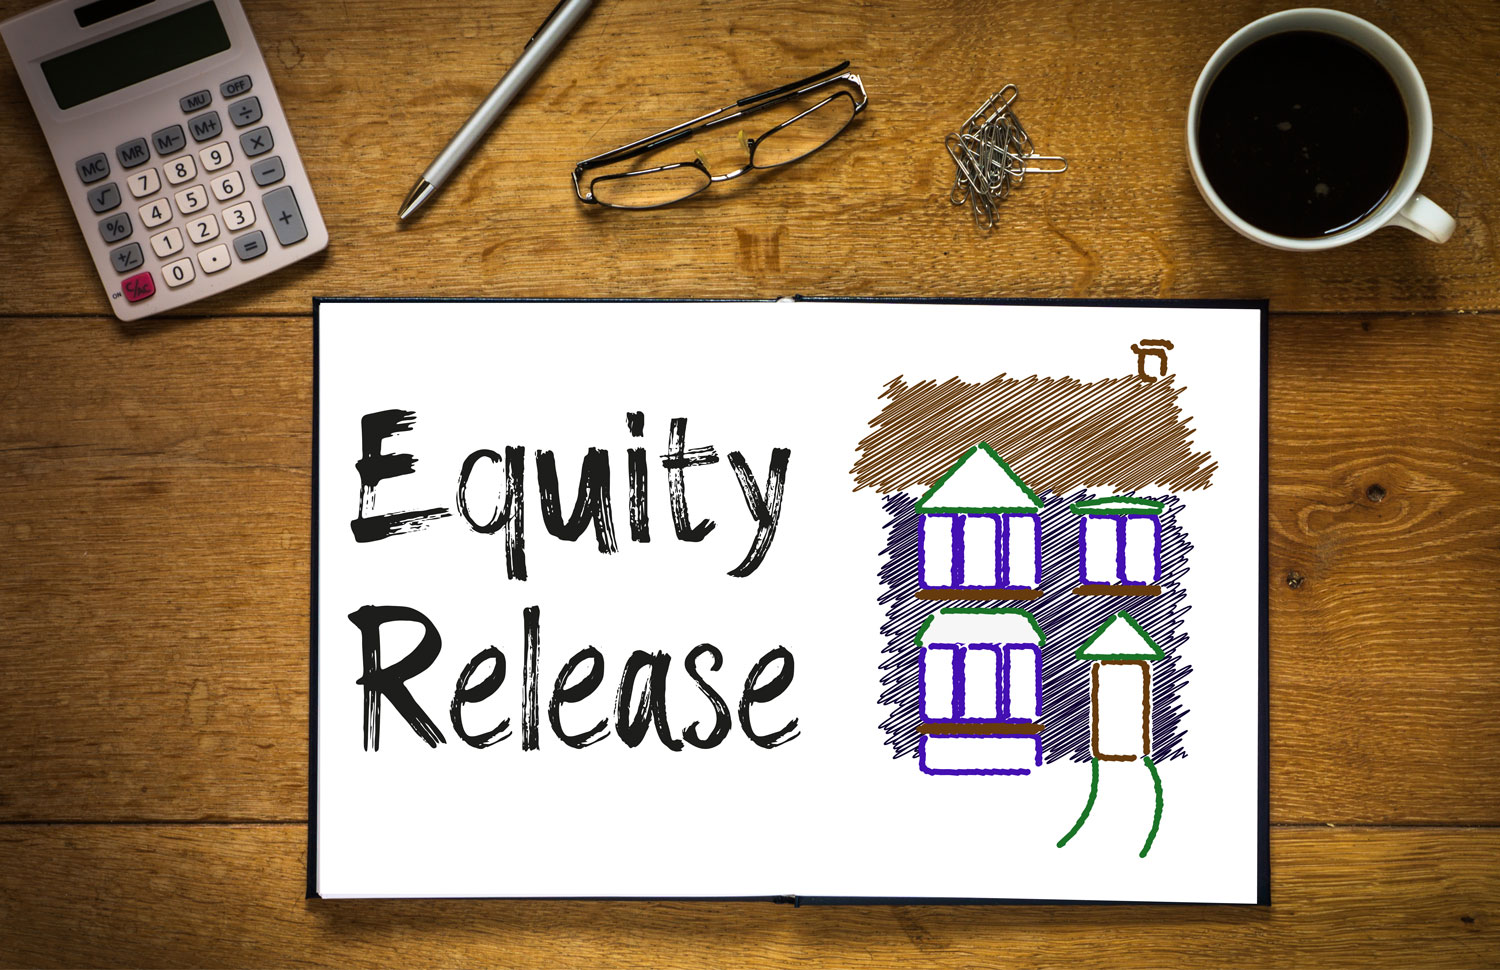 Your weekly equity release news update main image